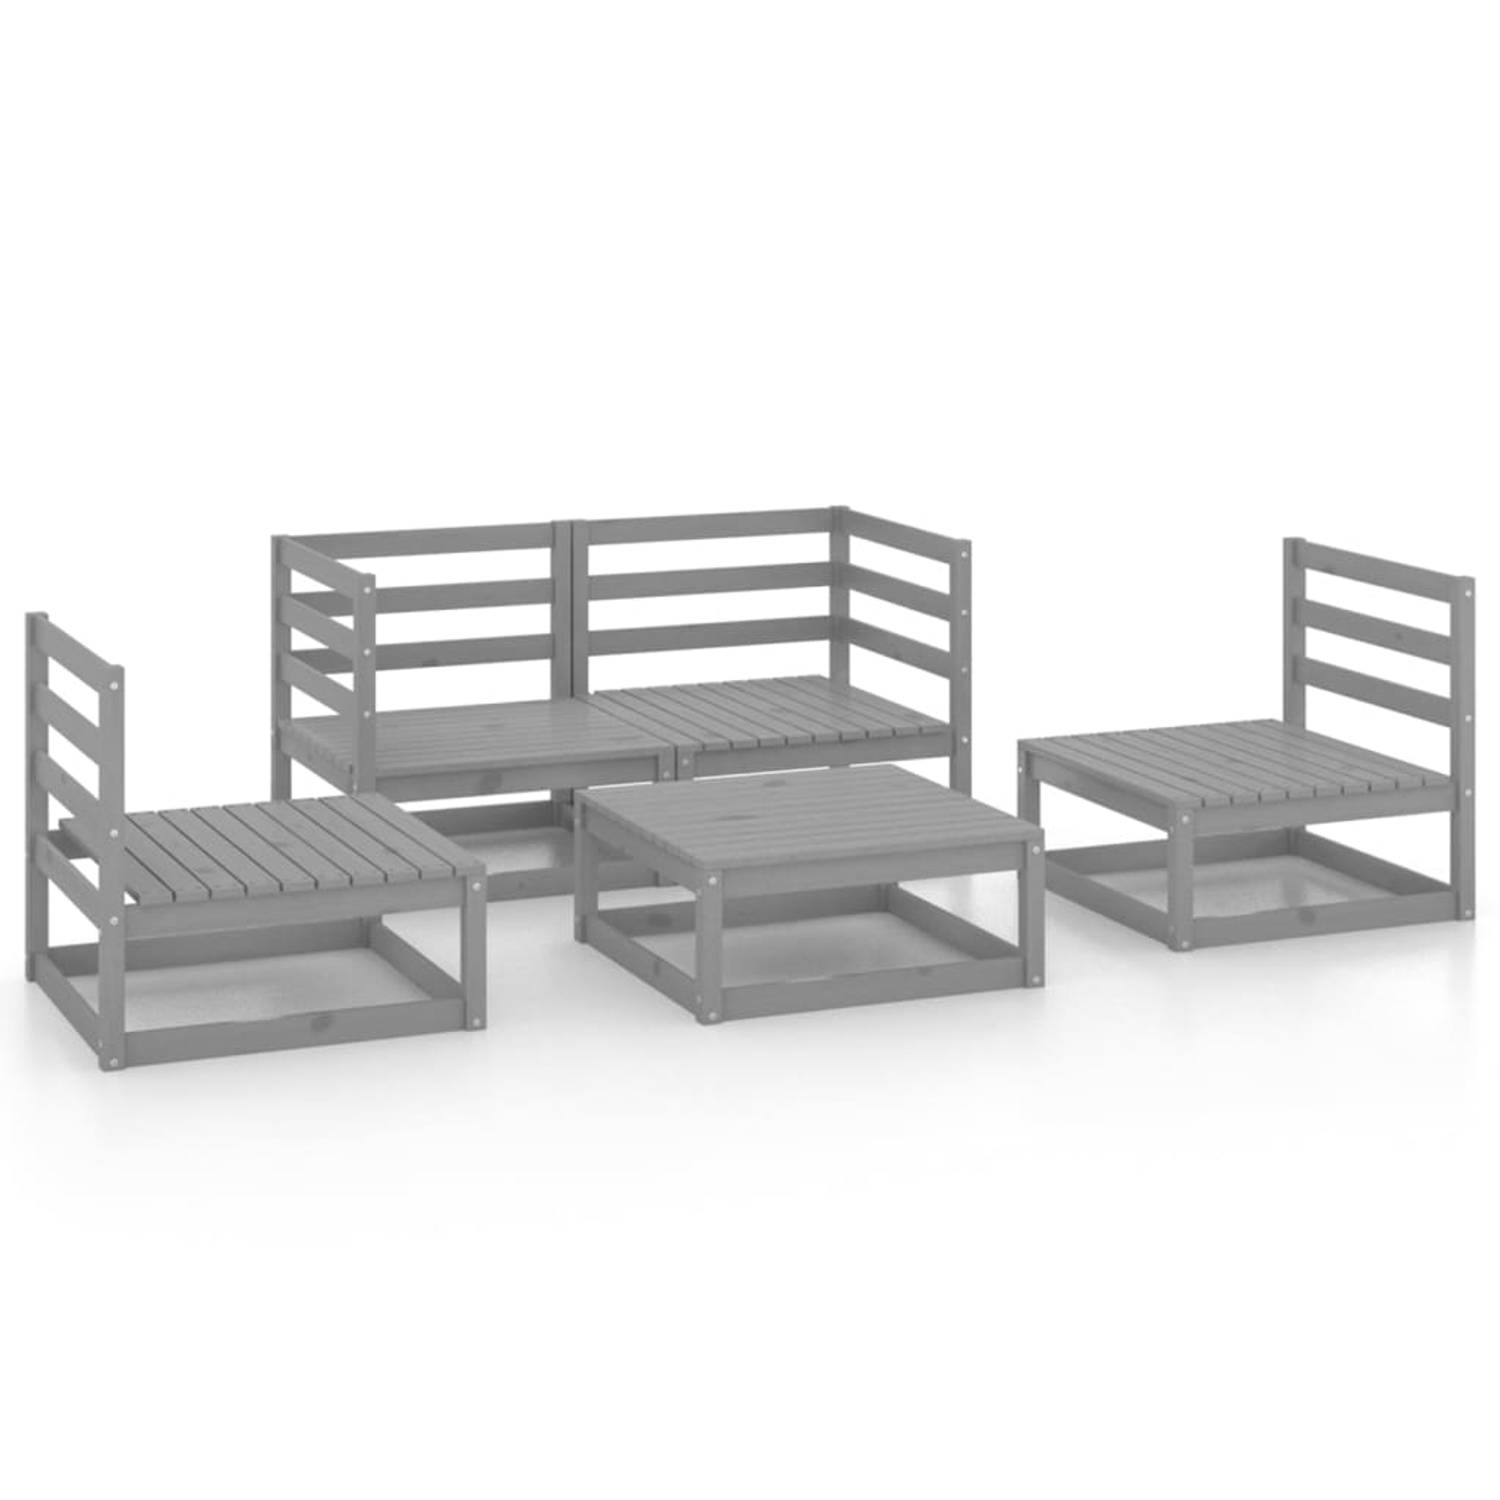 The Living Store 5-delige Loungeset massief grenenhout grijs - Tuinset